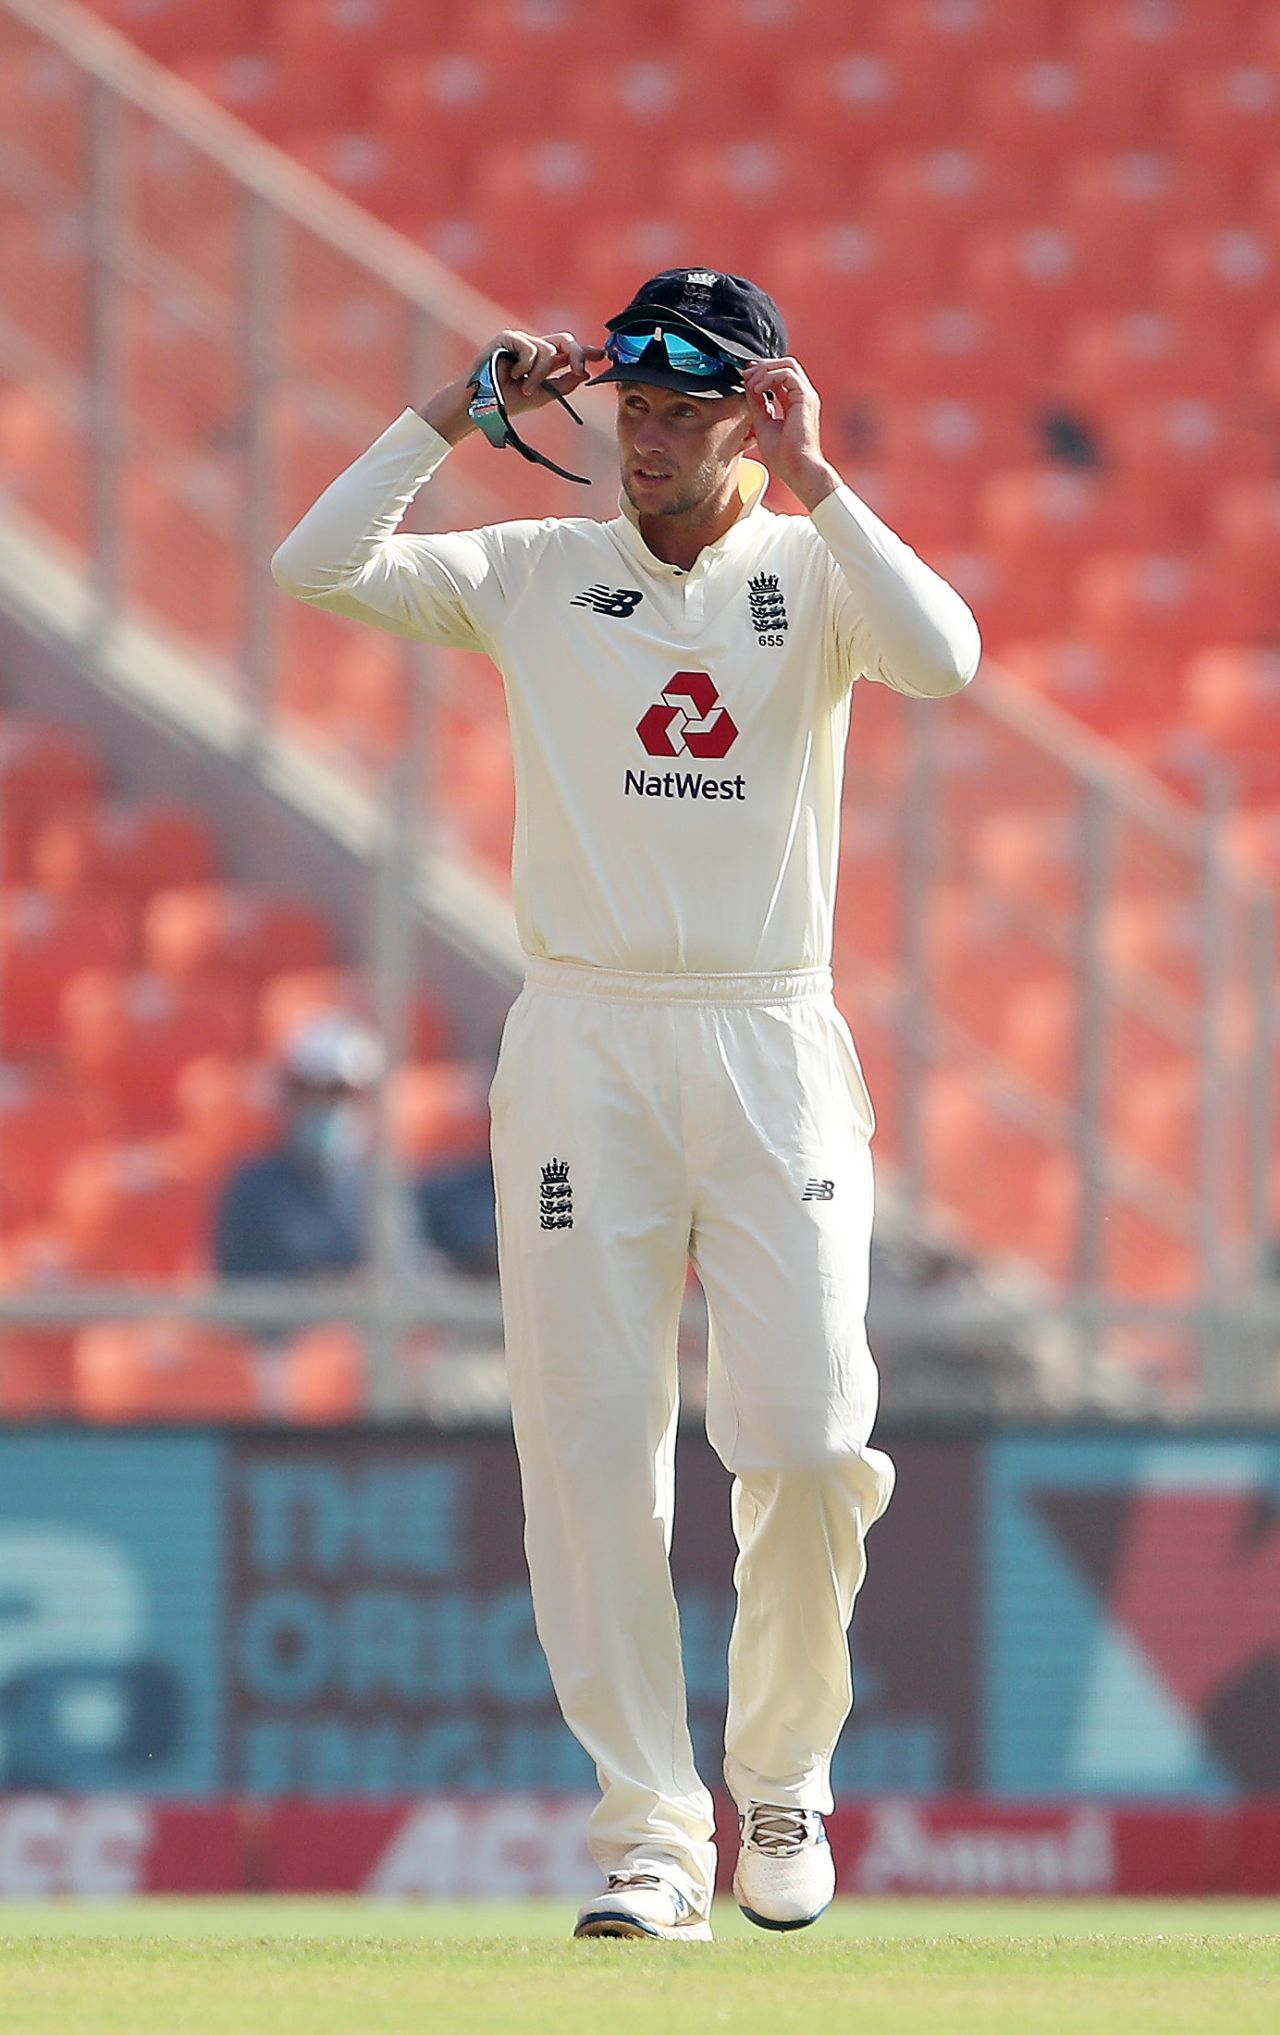 Joe Root on the field during the third day's play, India vs England, 4th Test, Ahmedabad, 3rd day, March 6, 2021

